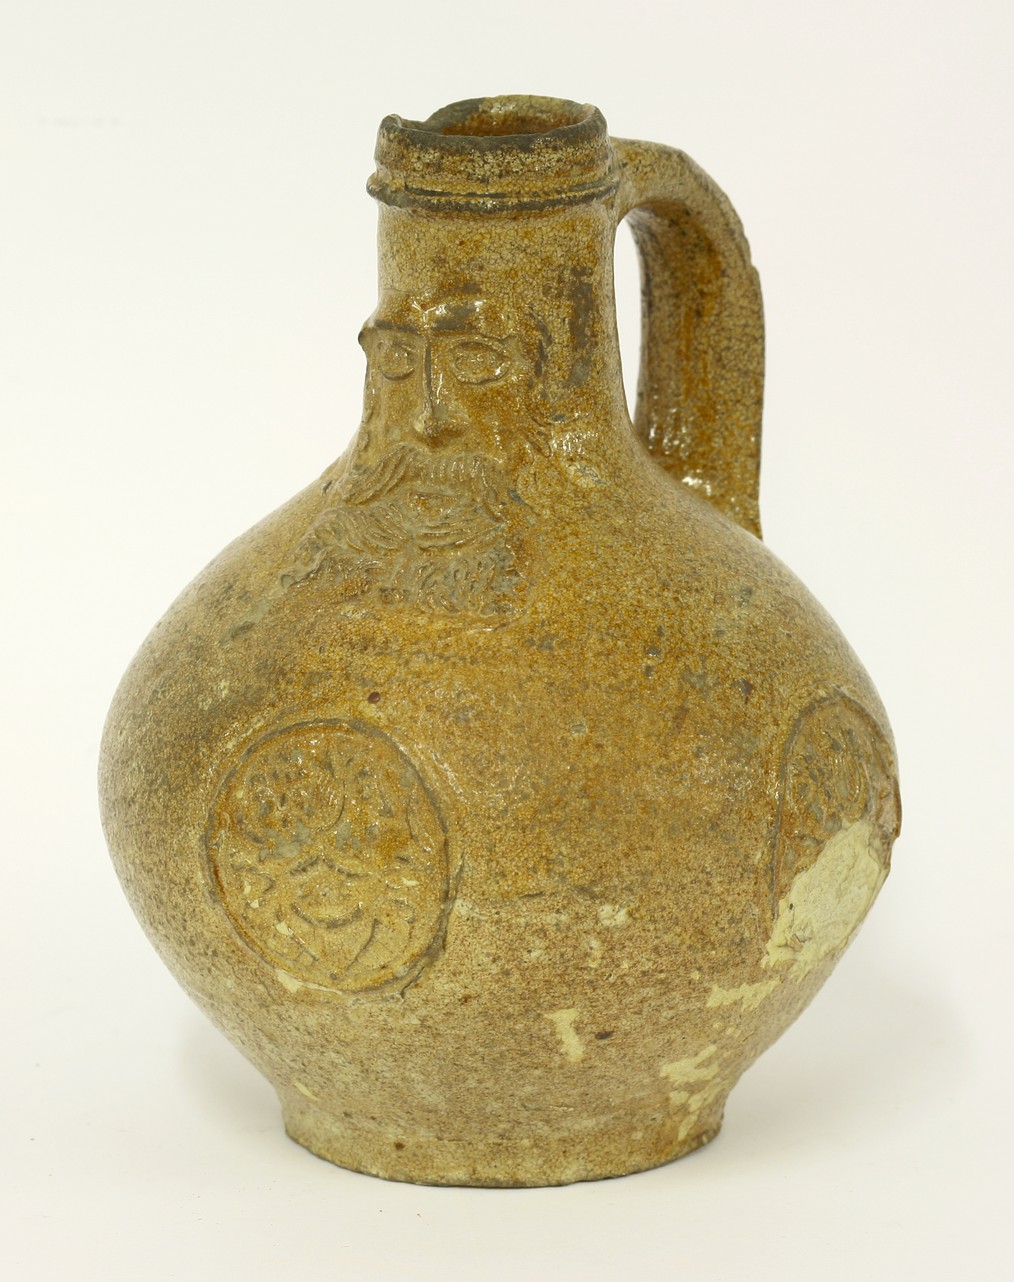 A salt-glazed stoneware Bellarmine,
probably 17th century, of typical bellied form with a bearded